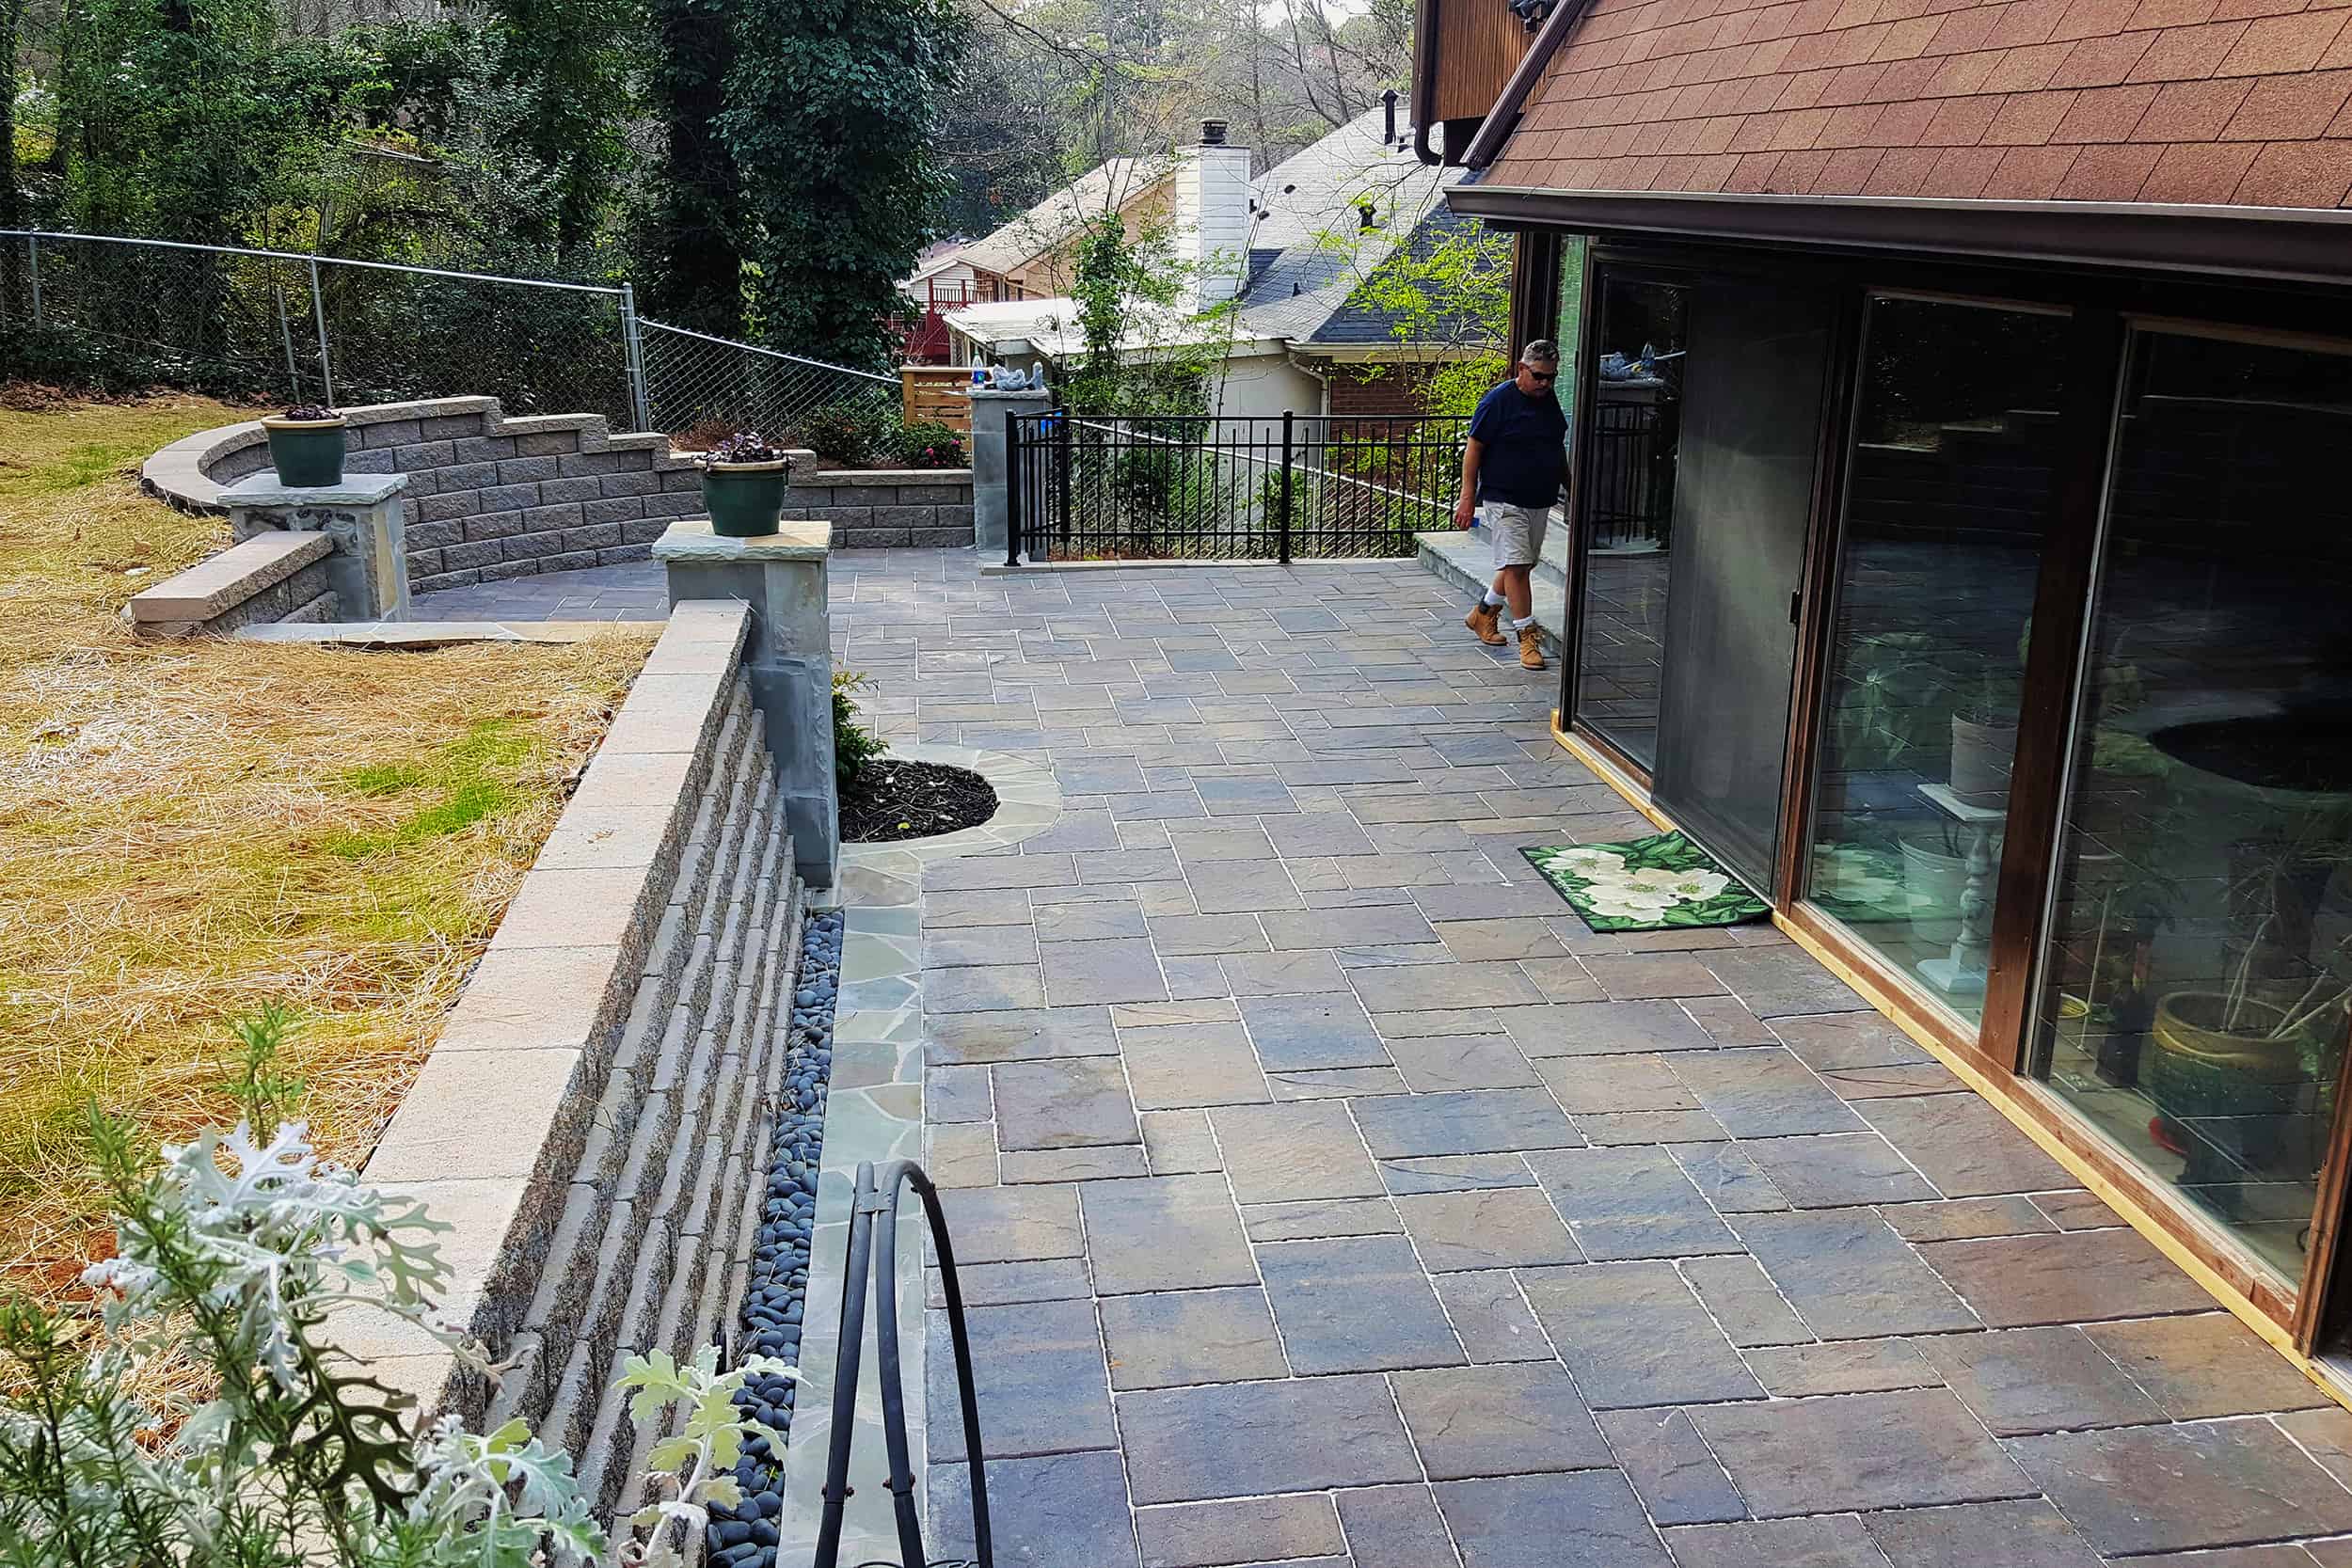 Doraville in mid century modern patio after